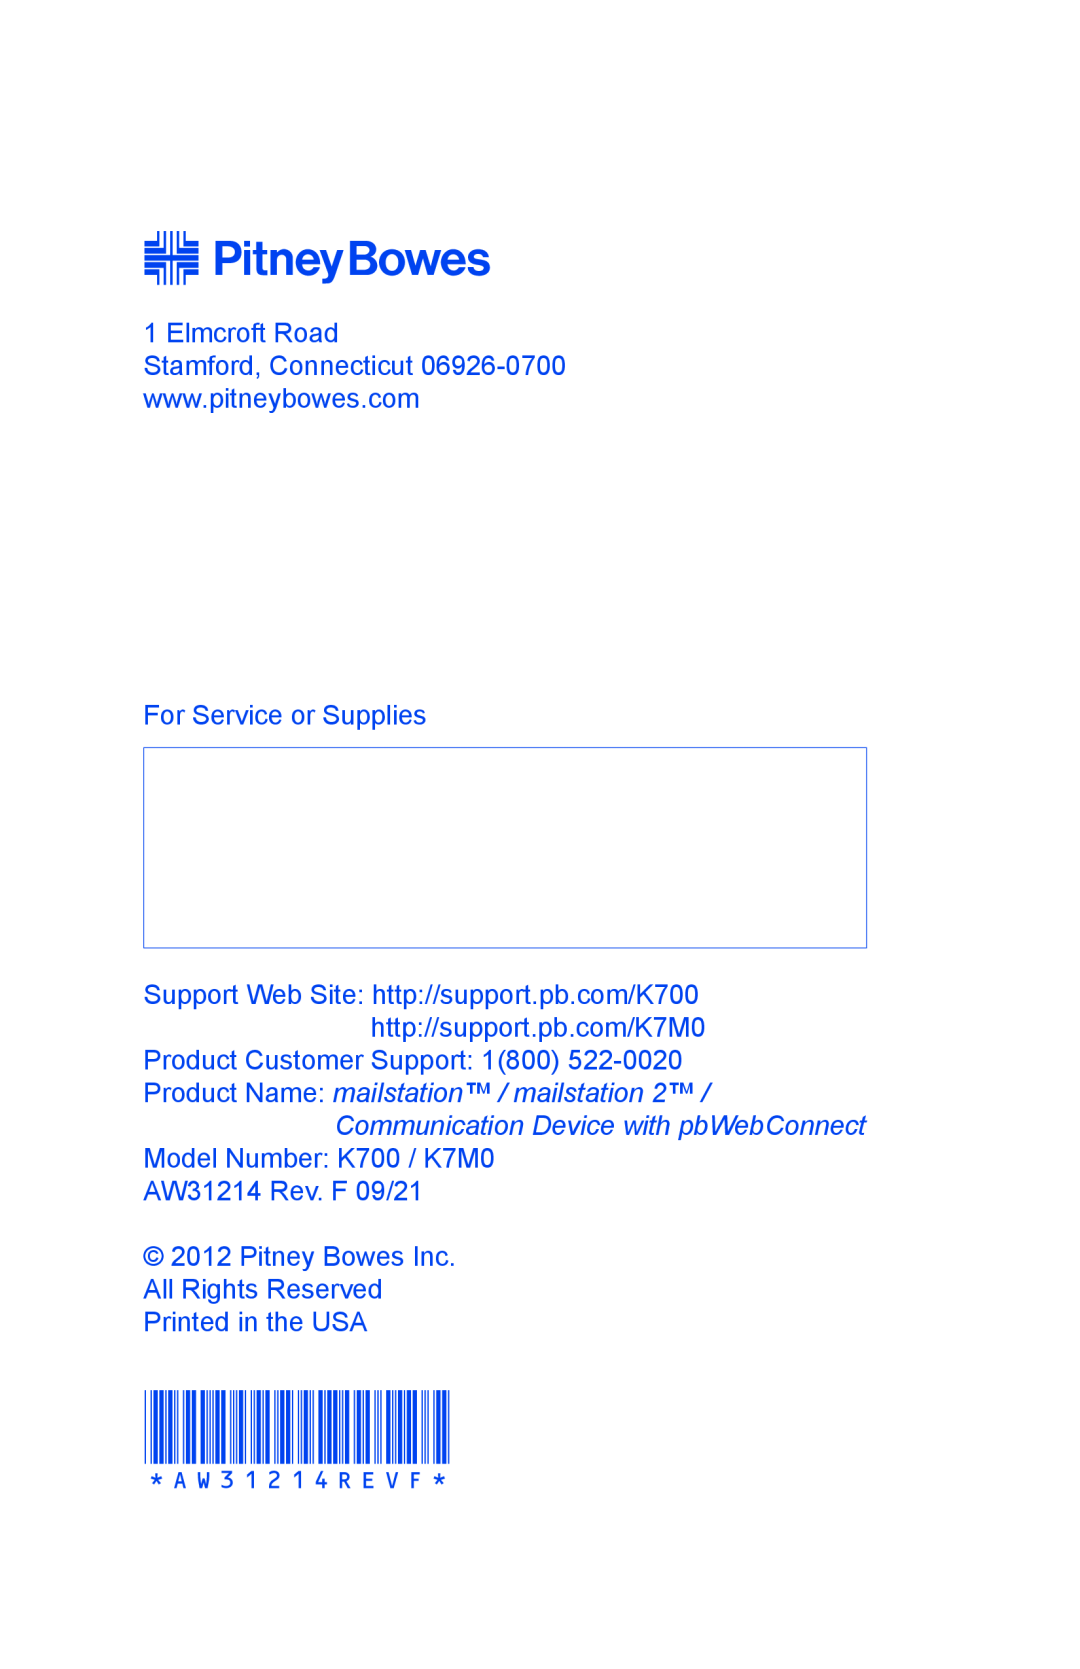 Pitney Bowes K700. K7M0 manual Elmcroft Road, For Service or Supplies, Product Customer Support 1800, AW31214REVF 